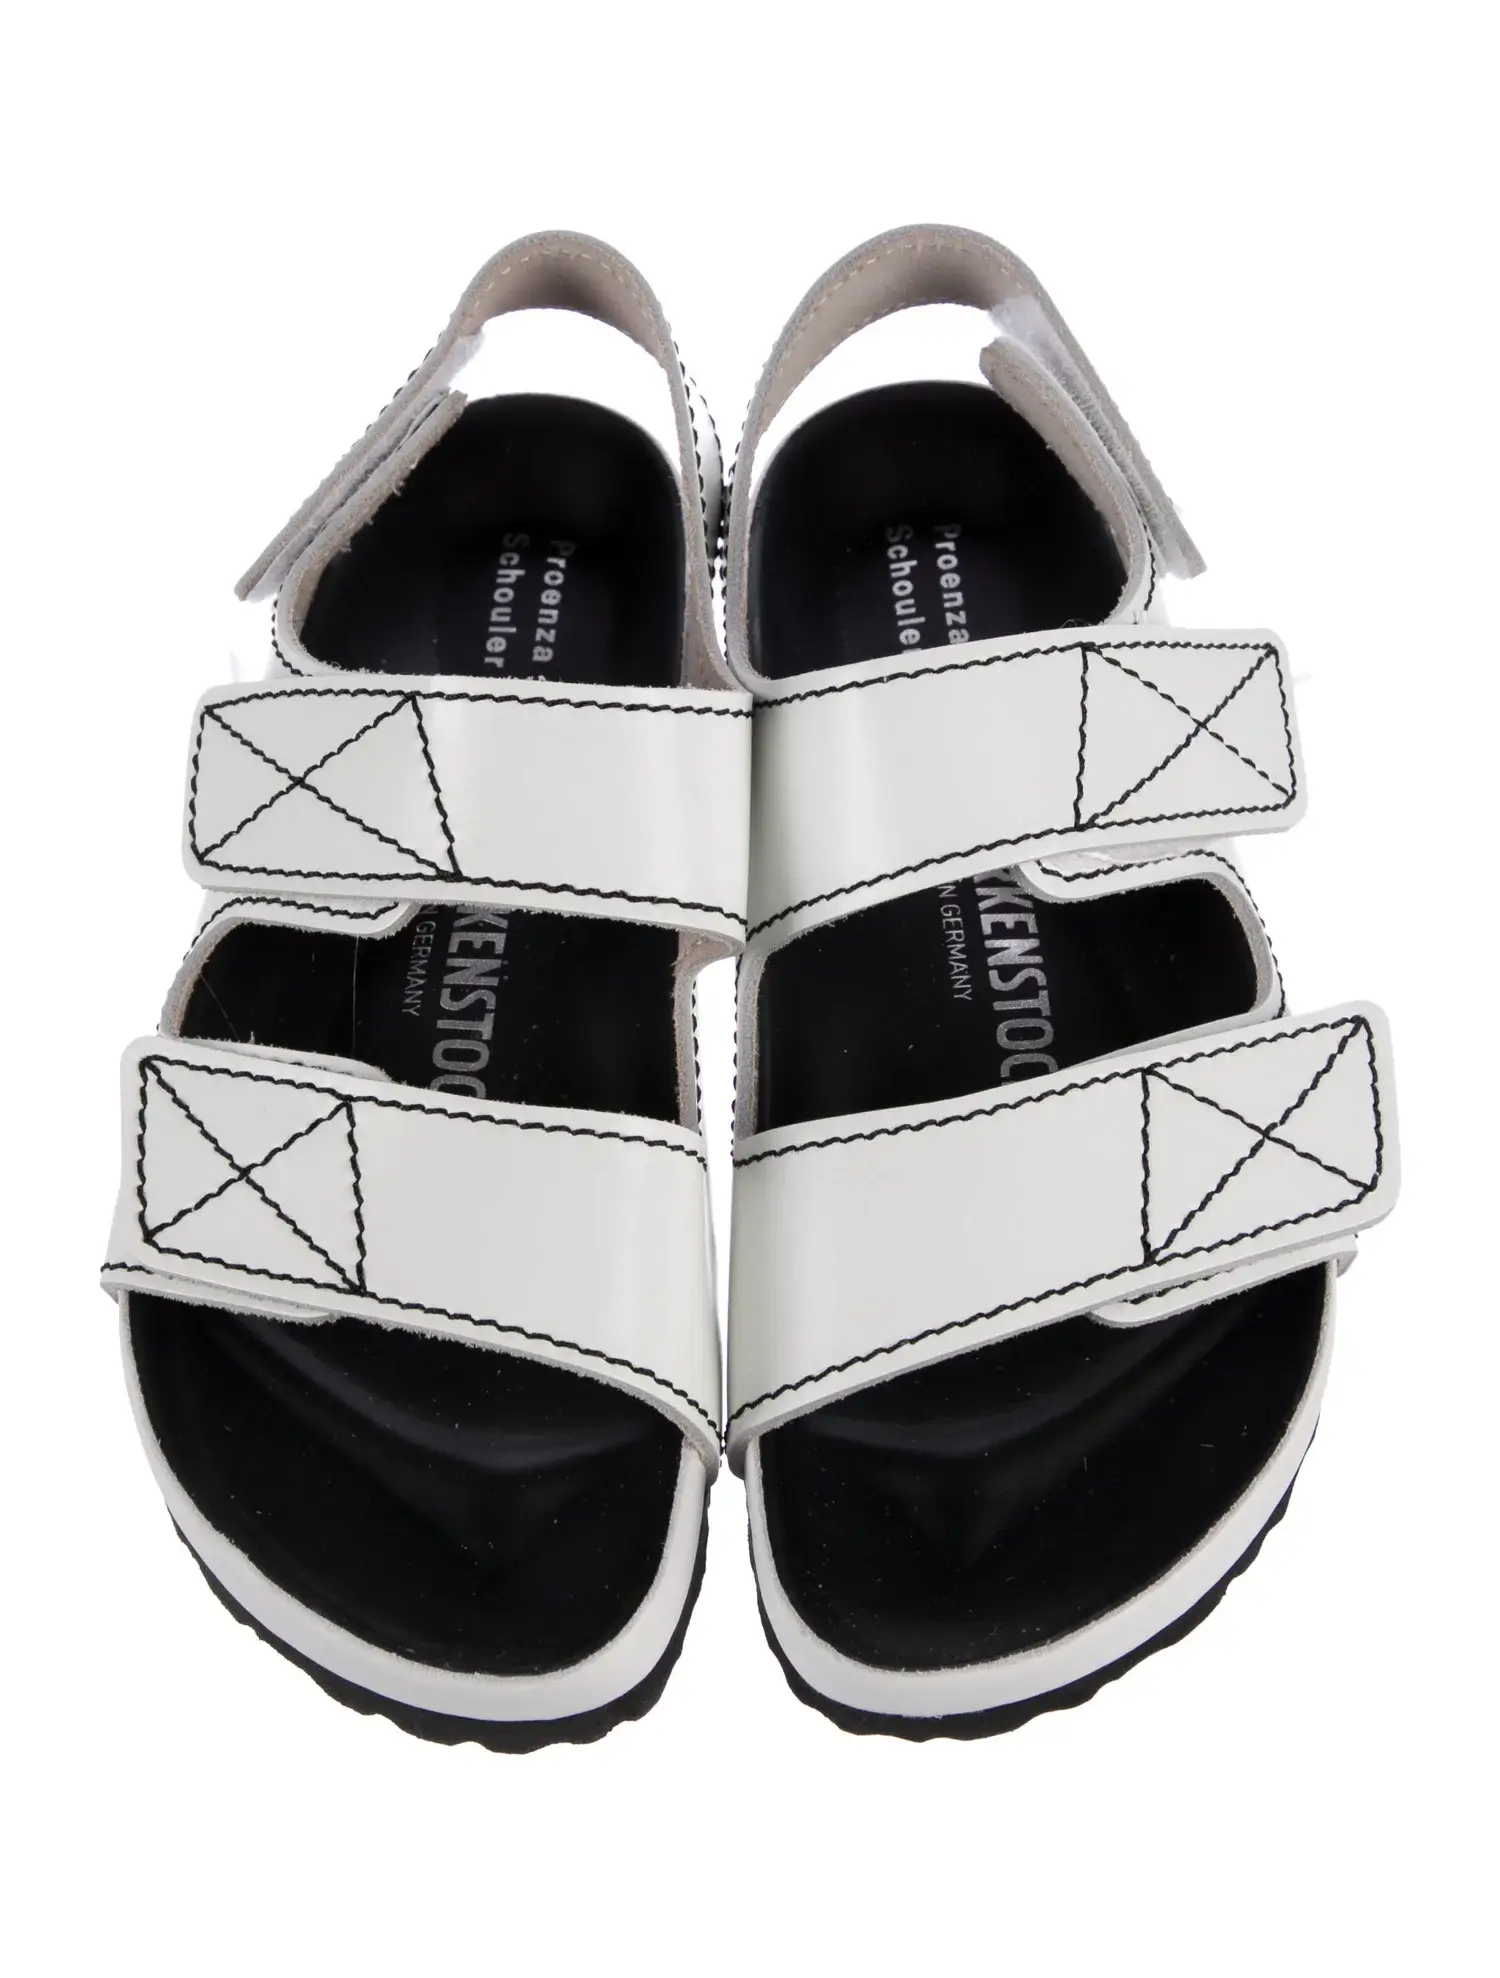 PROENZA SCHOULER X BIRKENSTOCK Leather Slingback Sandals from The RealReal